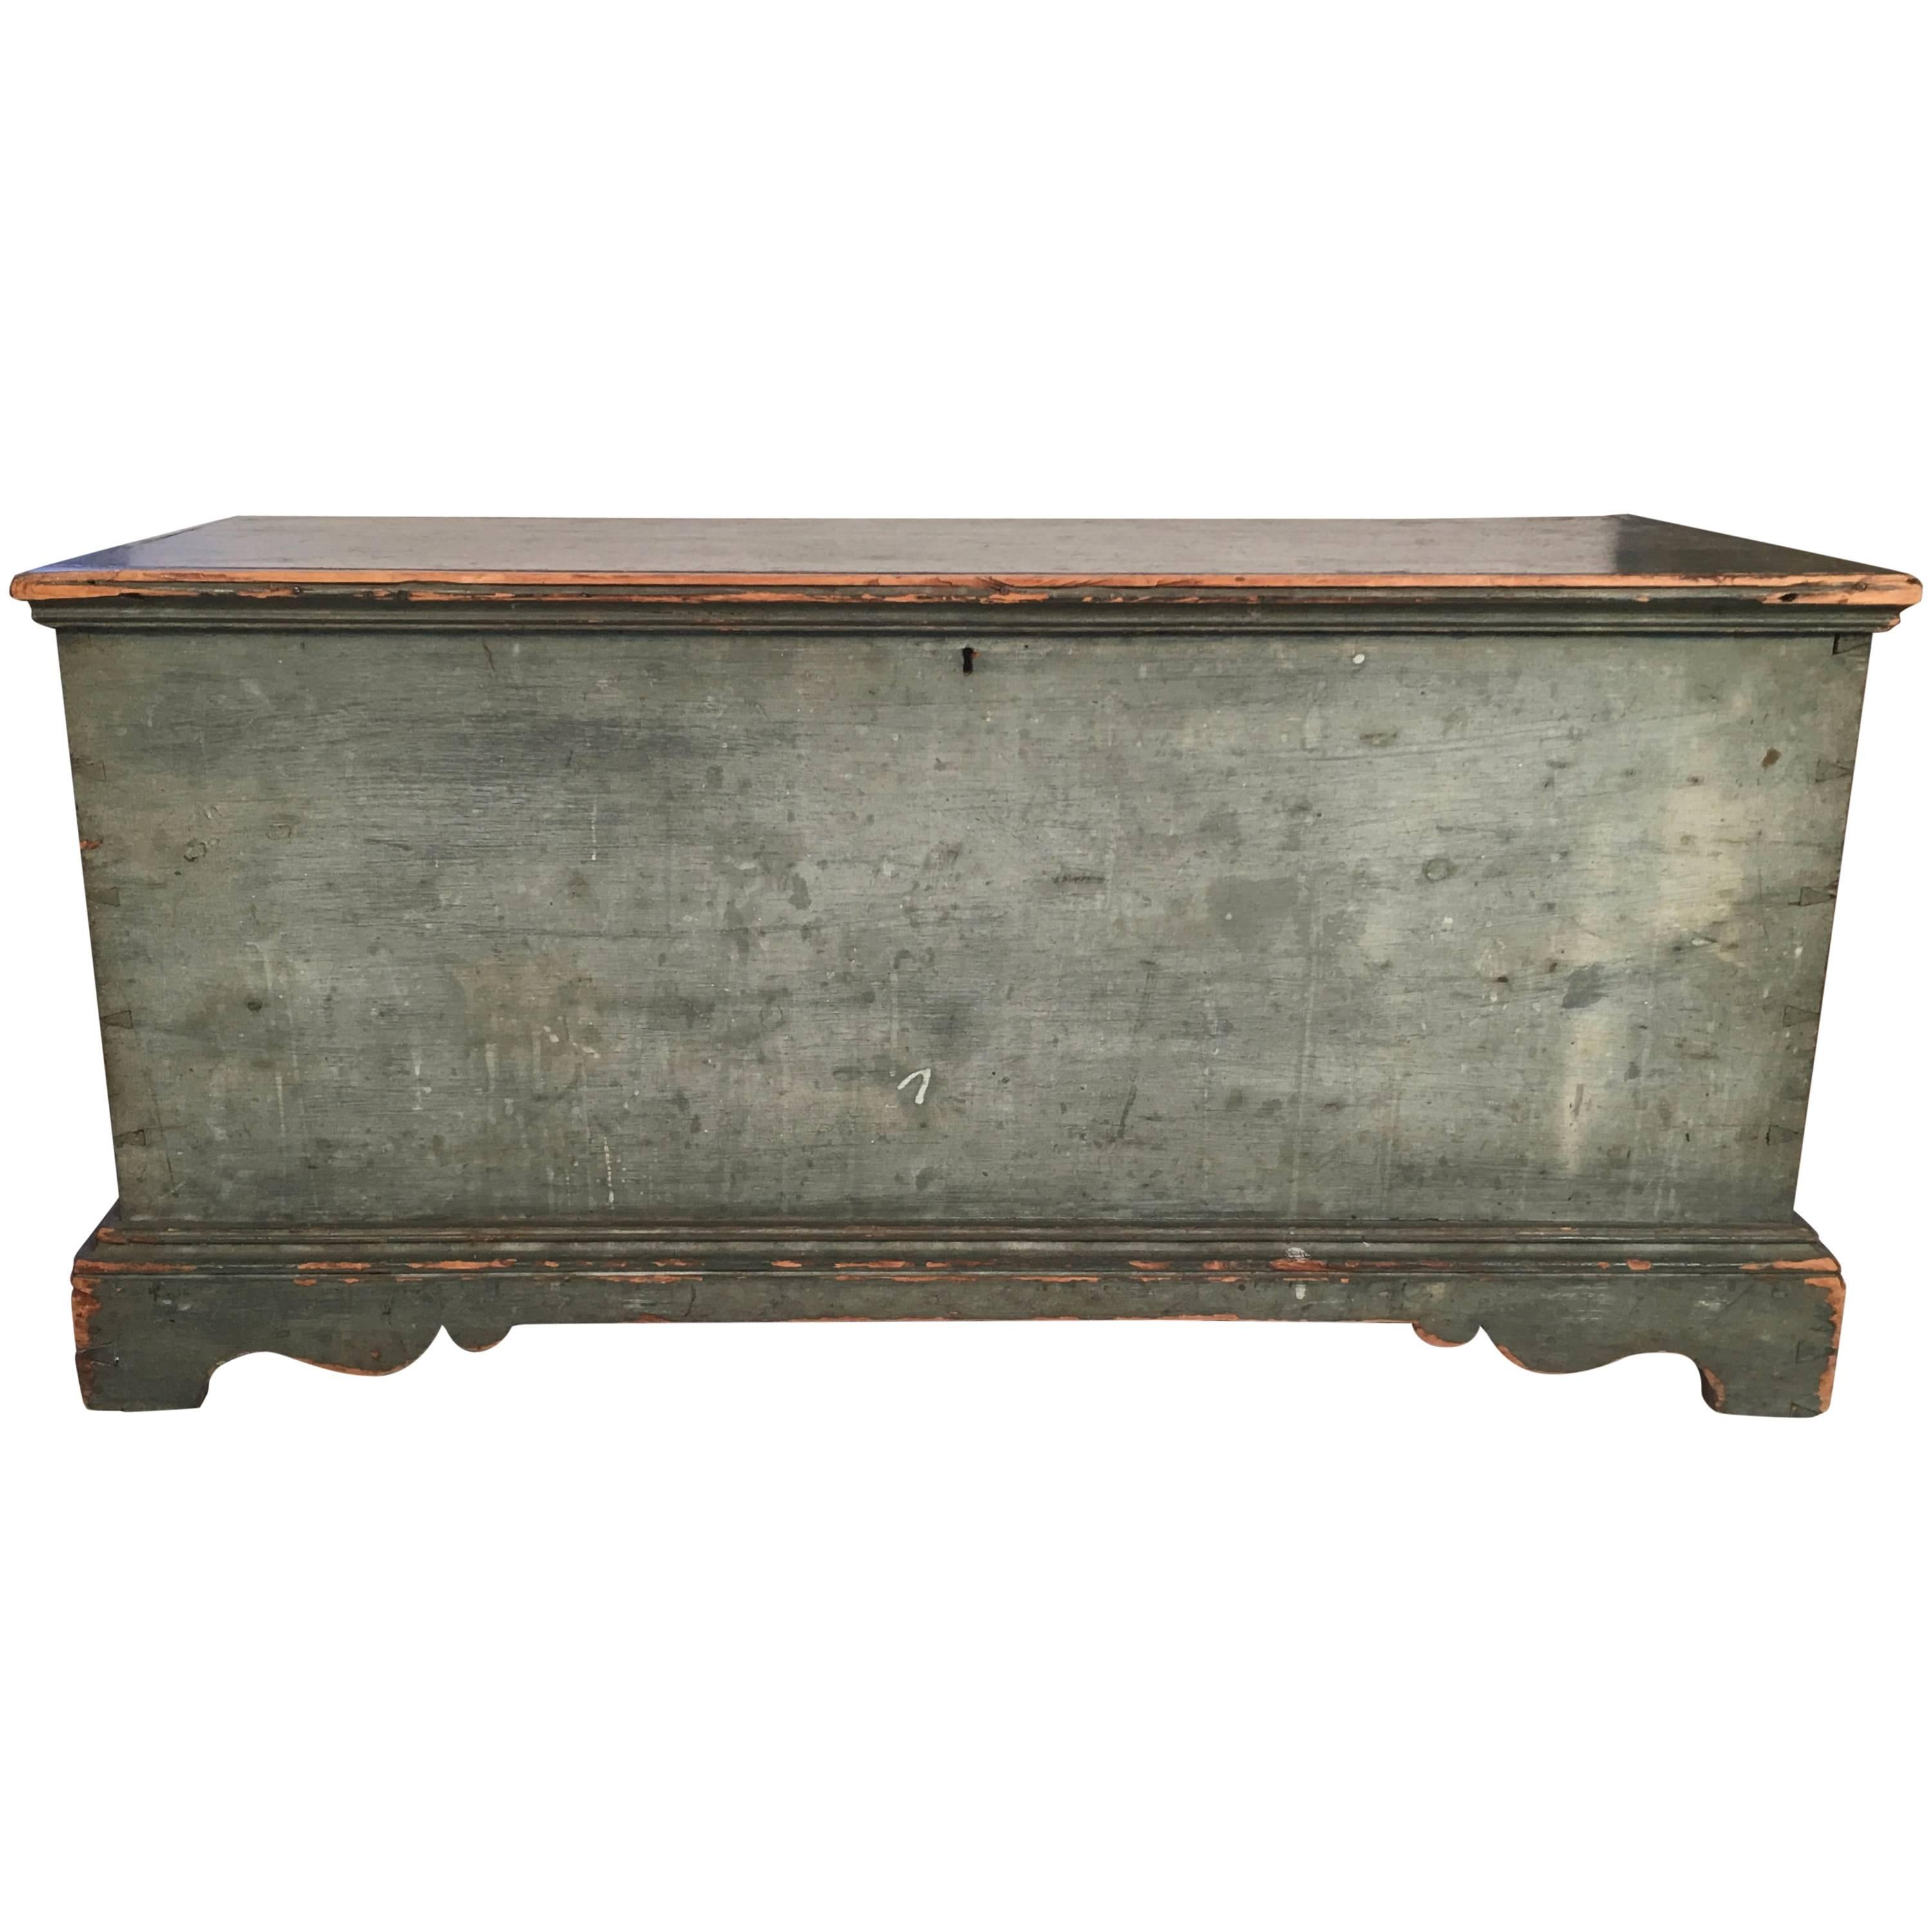 Blue Painted New England Blanket Chest, circa 1790